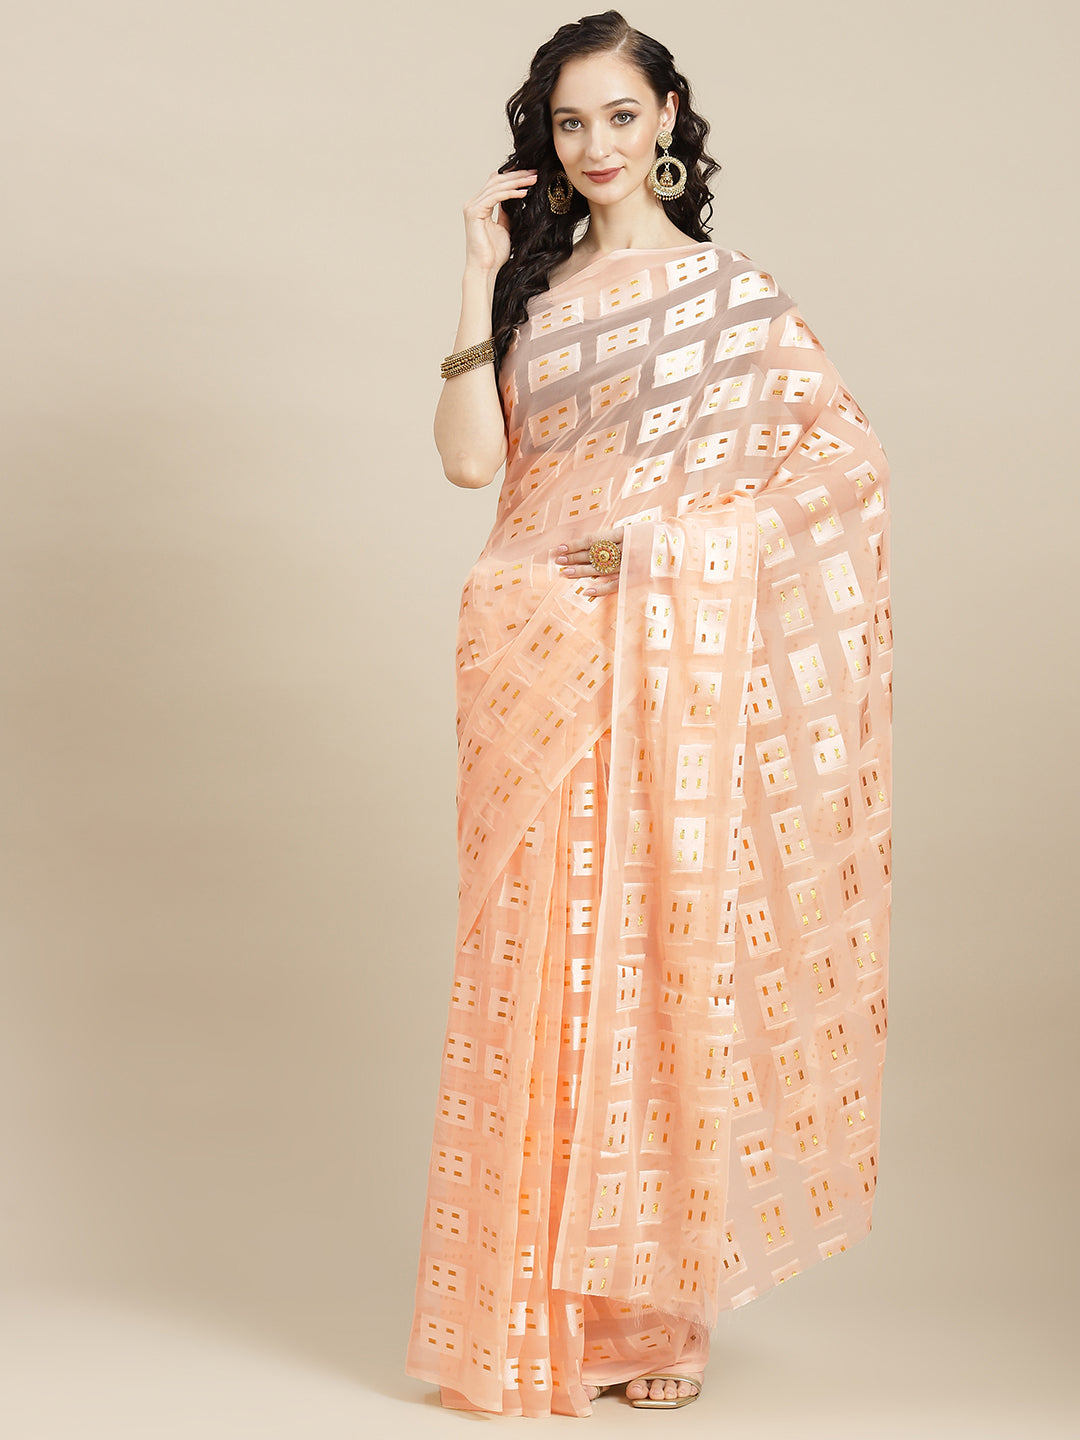 Ishin Women's Georgette Peach Embellished Saree With Blouse Piece